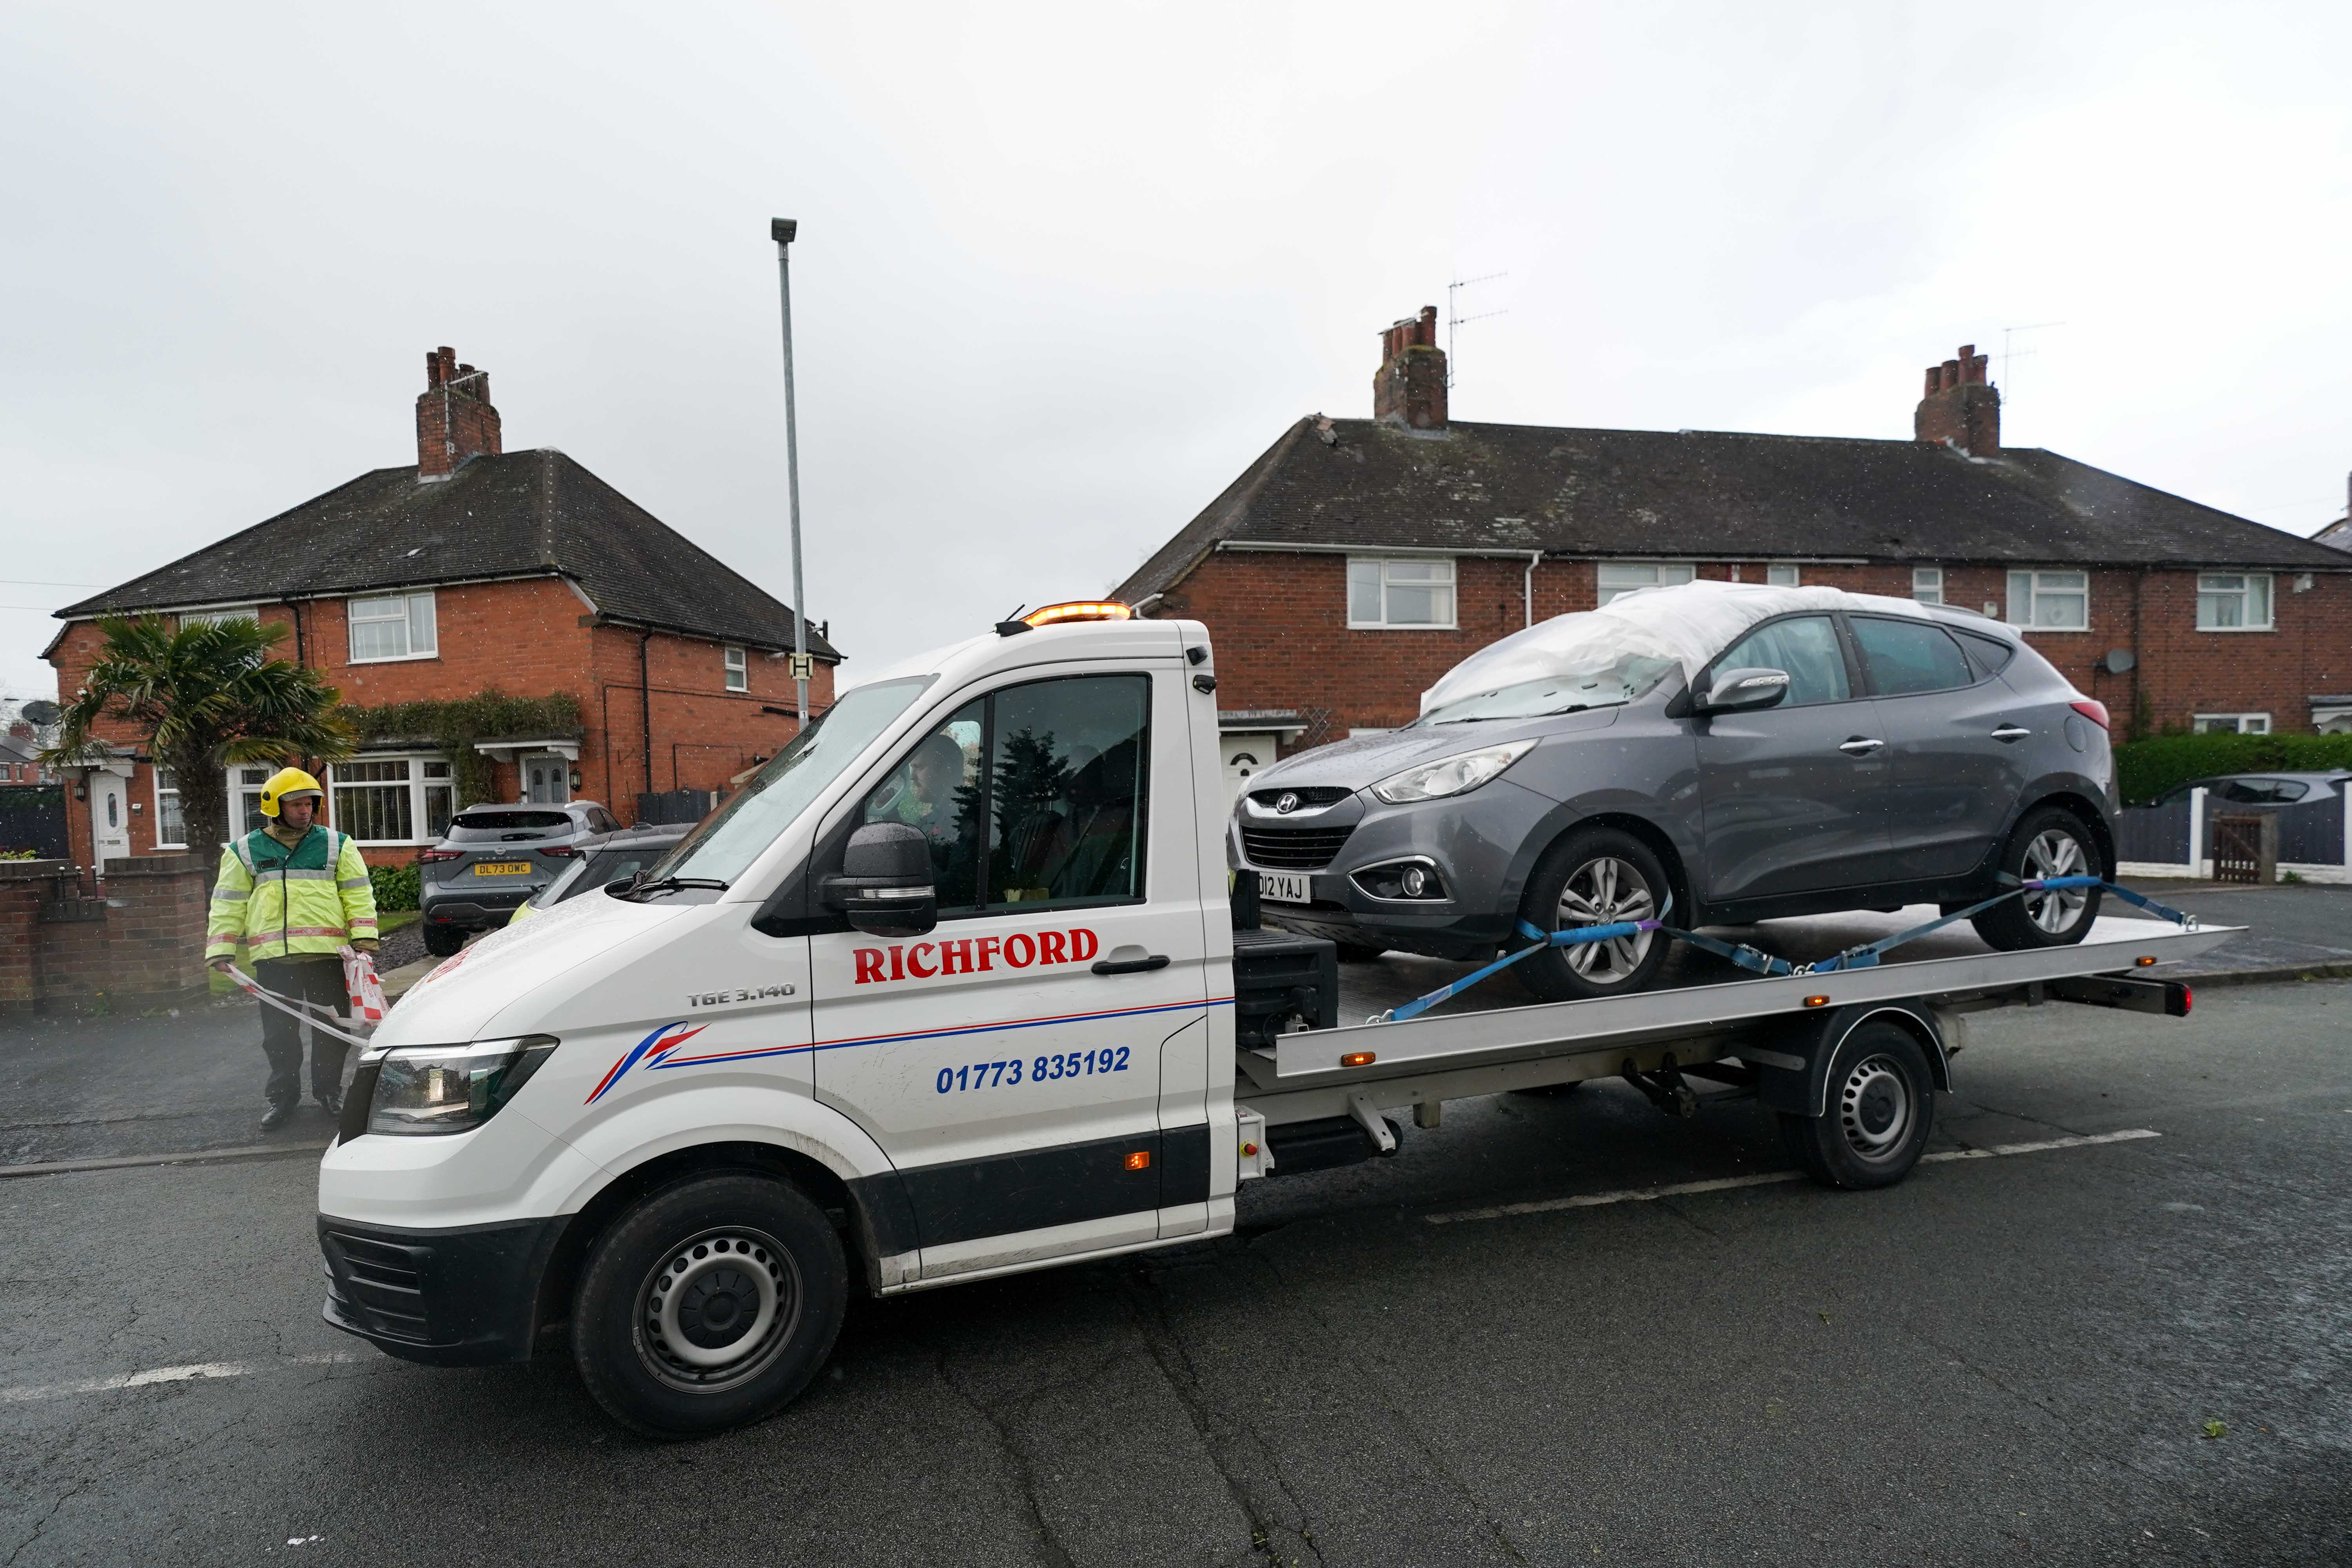 A damaged vehicle is towed away from St Gile's Road in Knutton, North Staffordshire